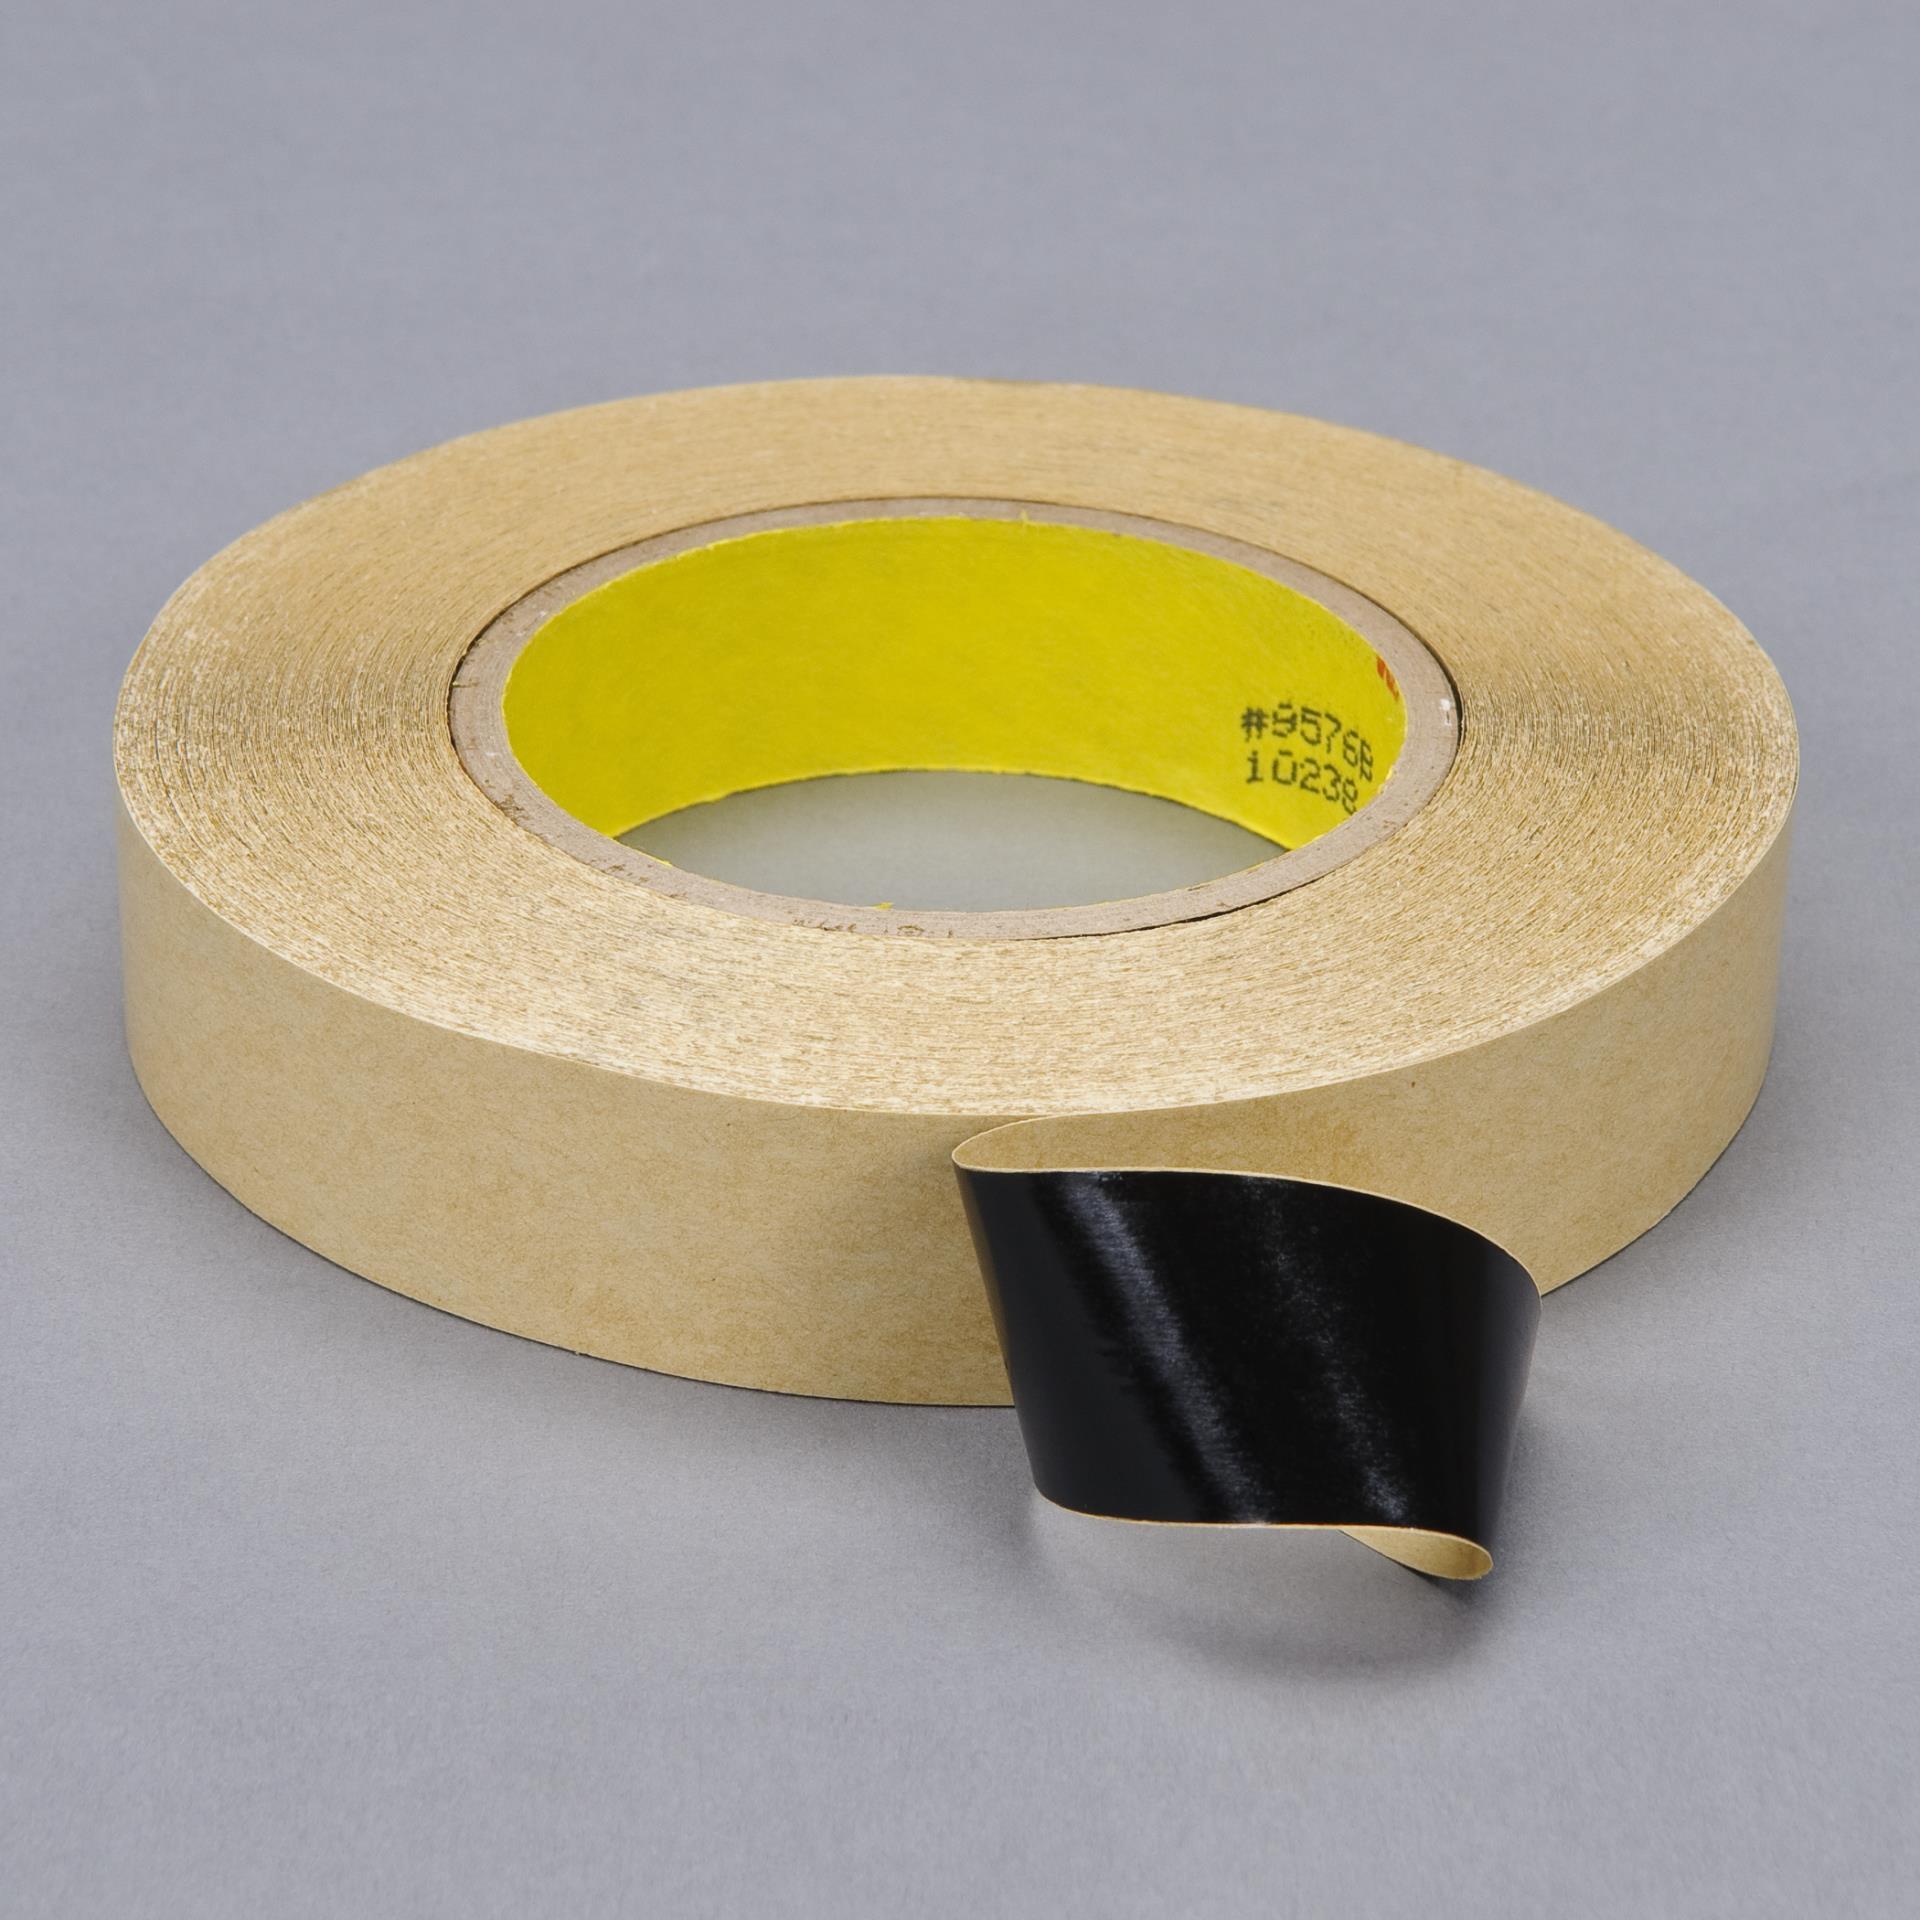 6 Rolls Adhesive Double-Sided Tape Clear 1/4" wide 60 Yards Pressure Sensitive 